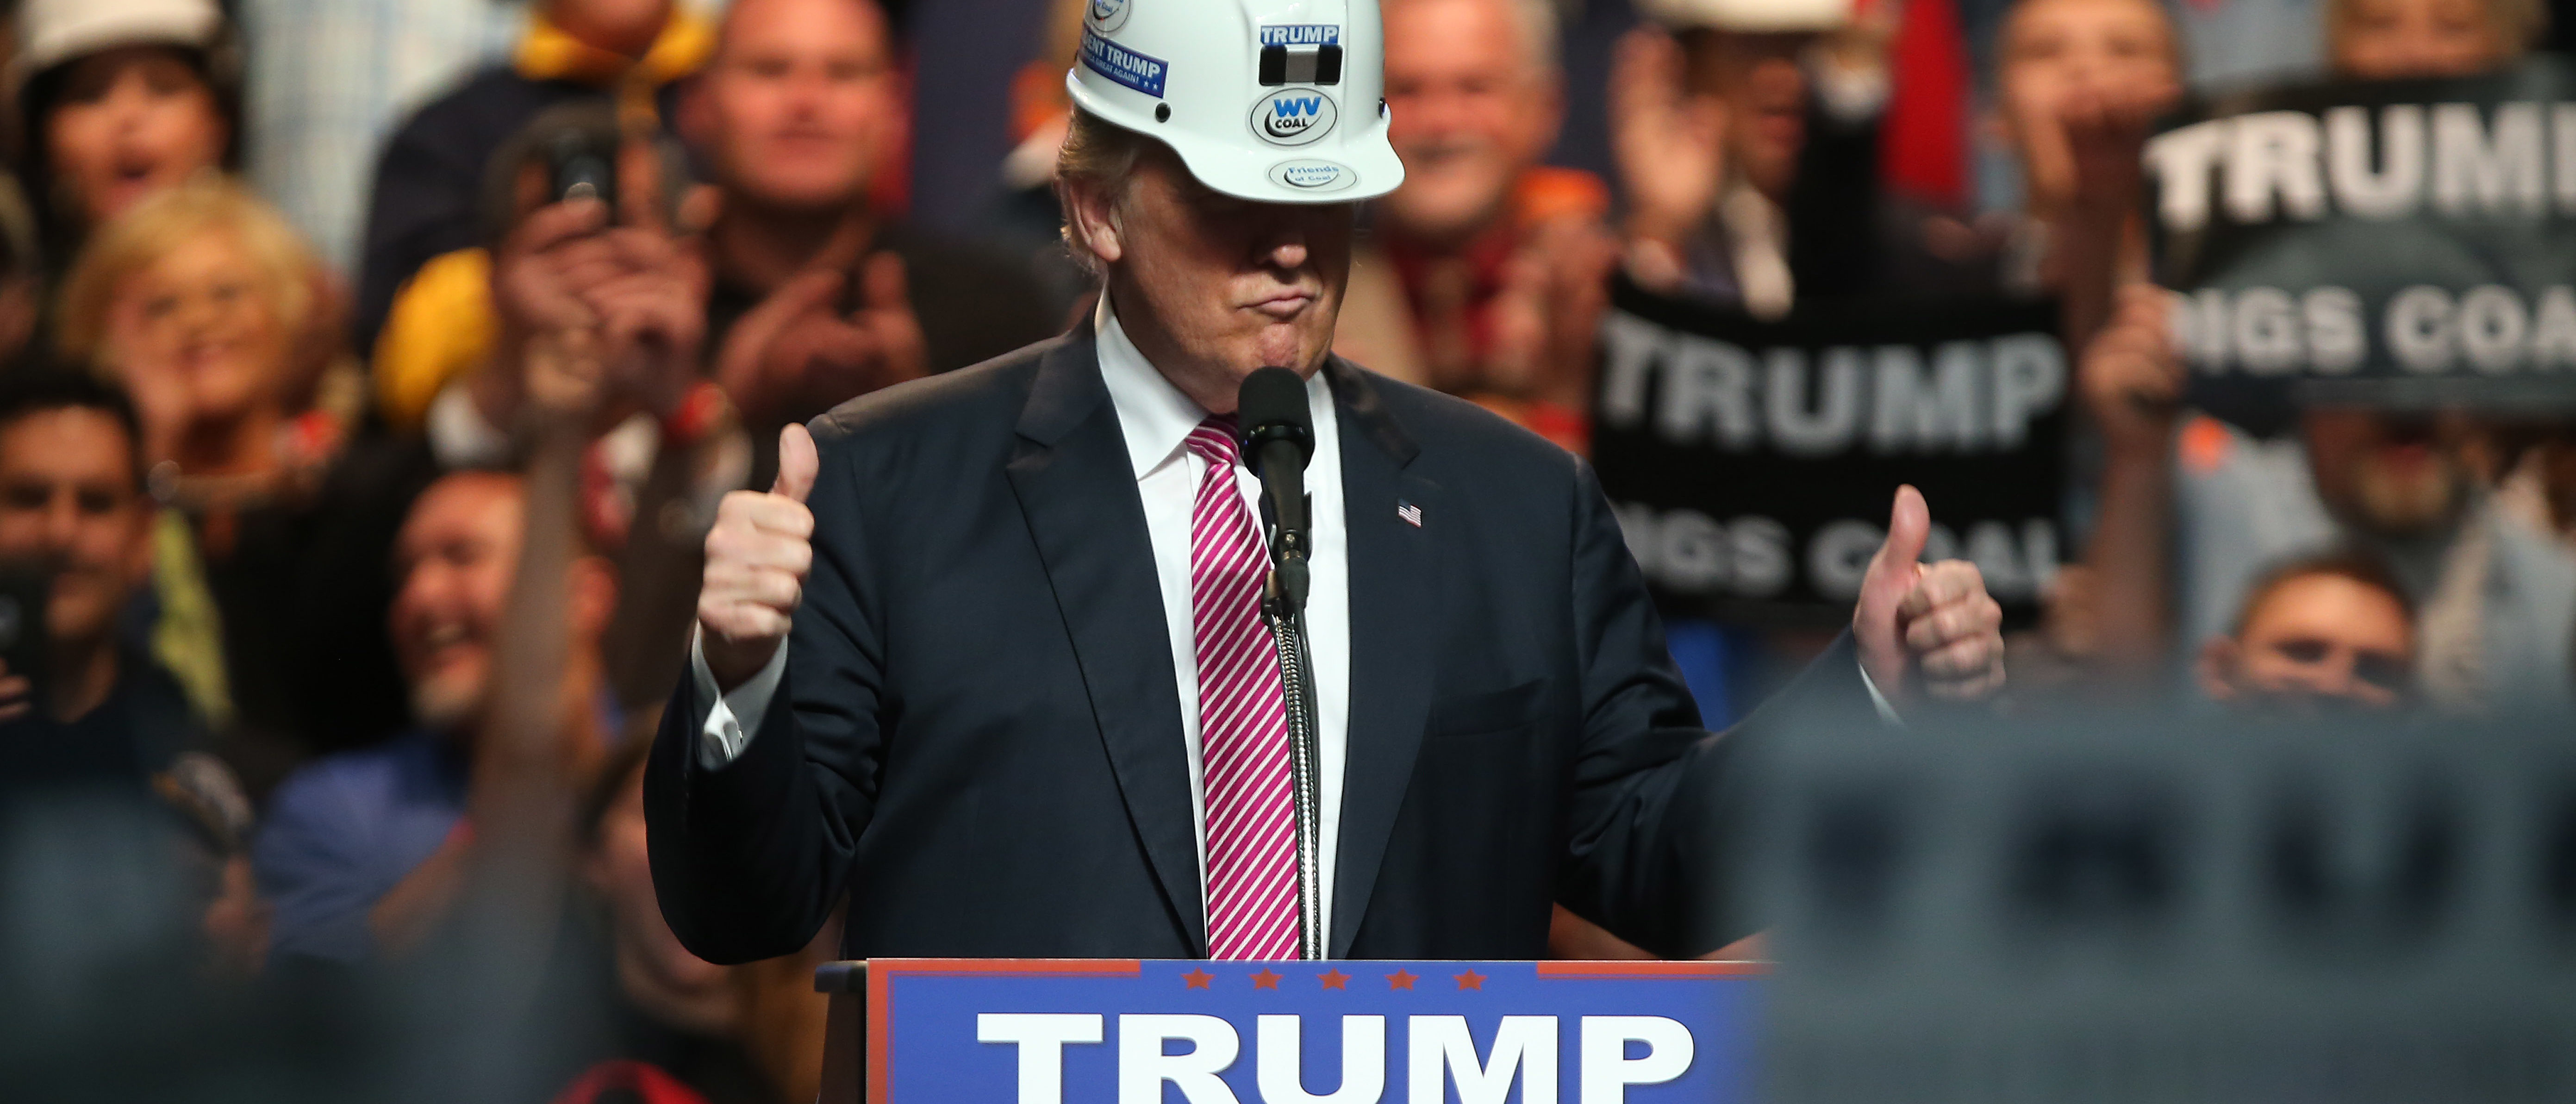 CHARLESTON, WV - MAY 05: Republican Presidential candidate Donald Trump models a hard hat in support of the miners during his rally at the Charleston Civic Center on May 5, 2016 in Charleston, West Virginia. Trump became the Republican presumptive nominee following his landslide win in indiana on Tuesday.(Photo by Mark Lyons/Getty Images)